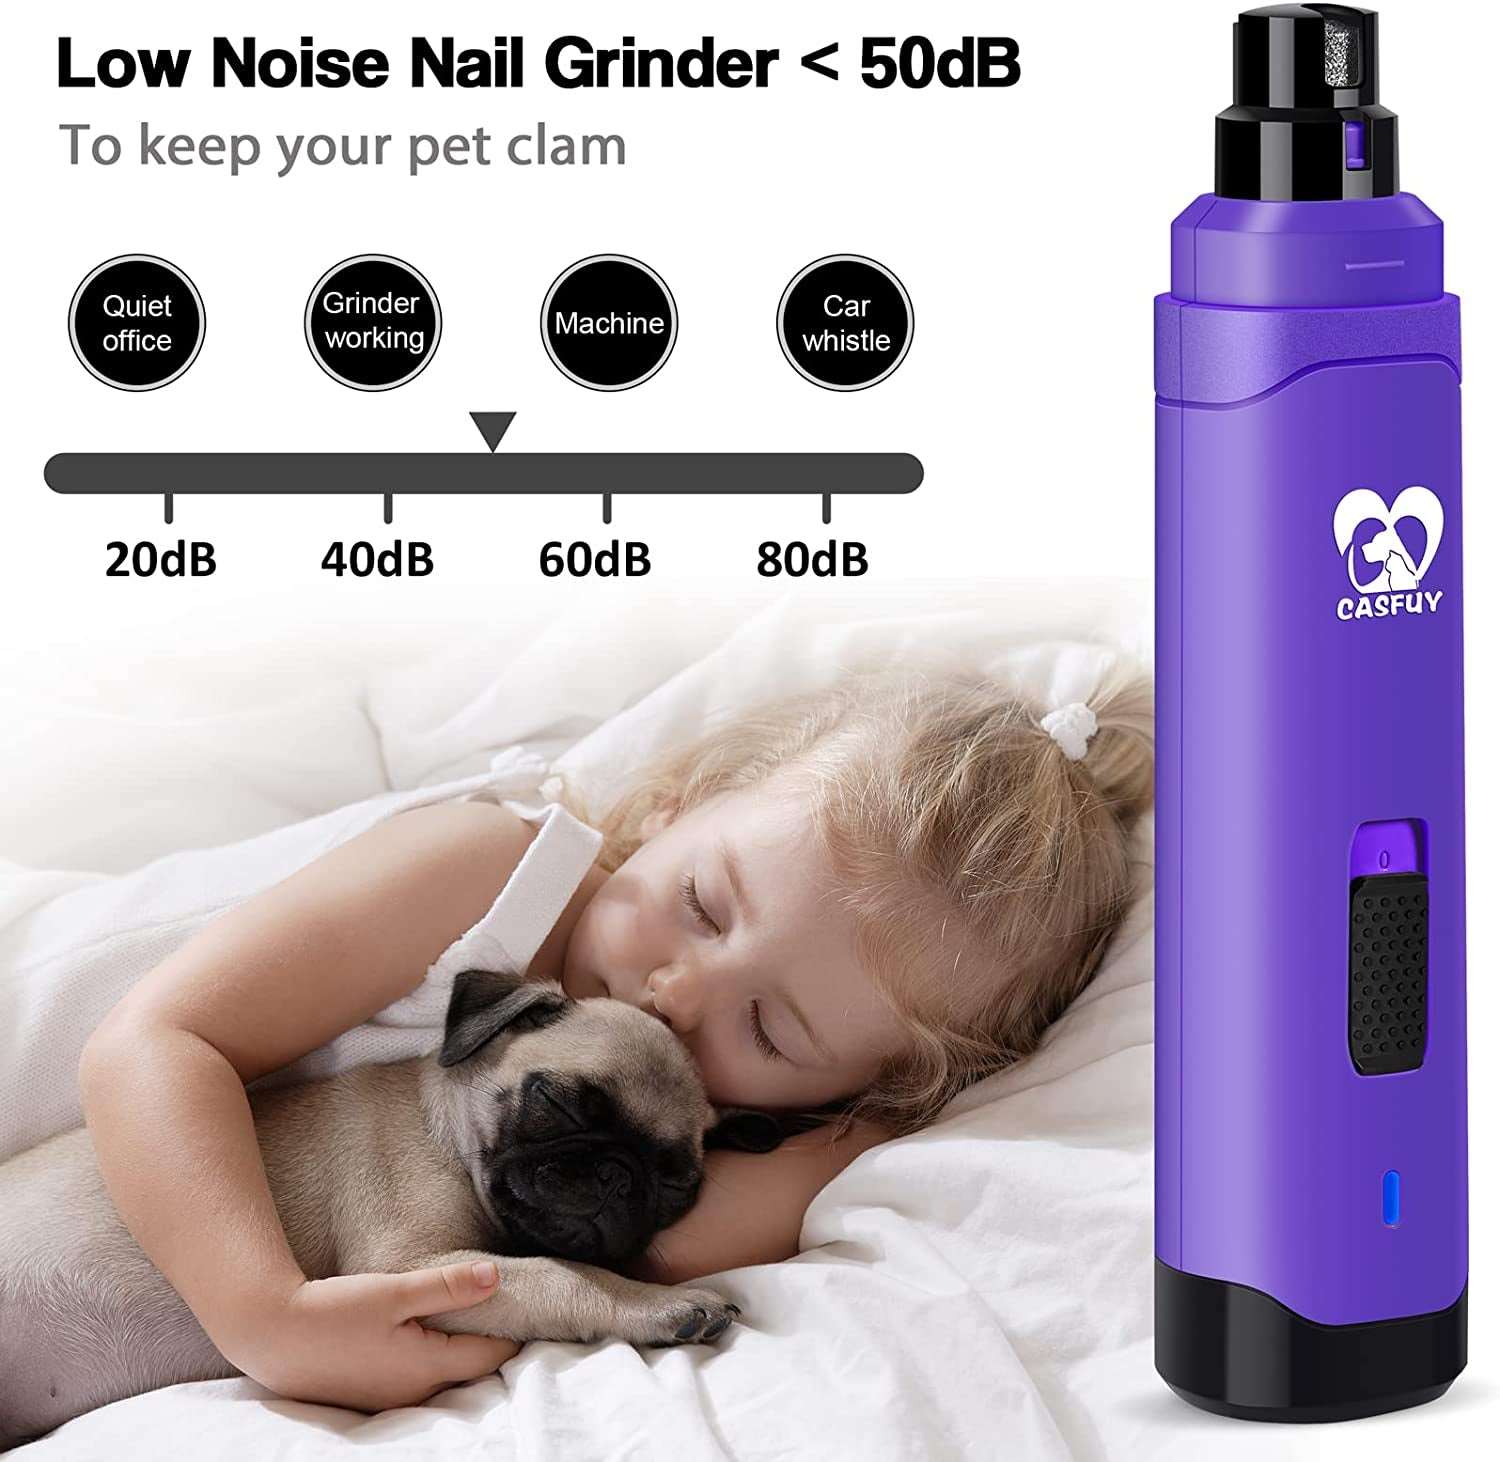 Dog Nail Grinder Upgraded - Professional 2-Speed Electric Rechargeable Pet Nail Trimmer Painless Paws 